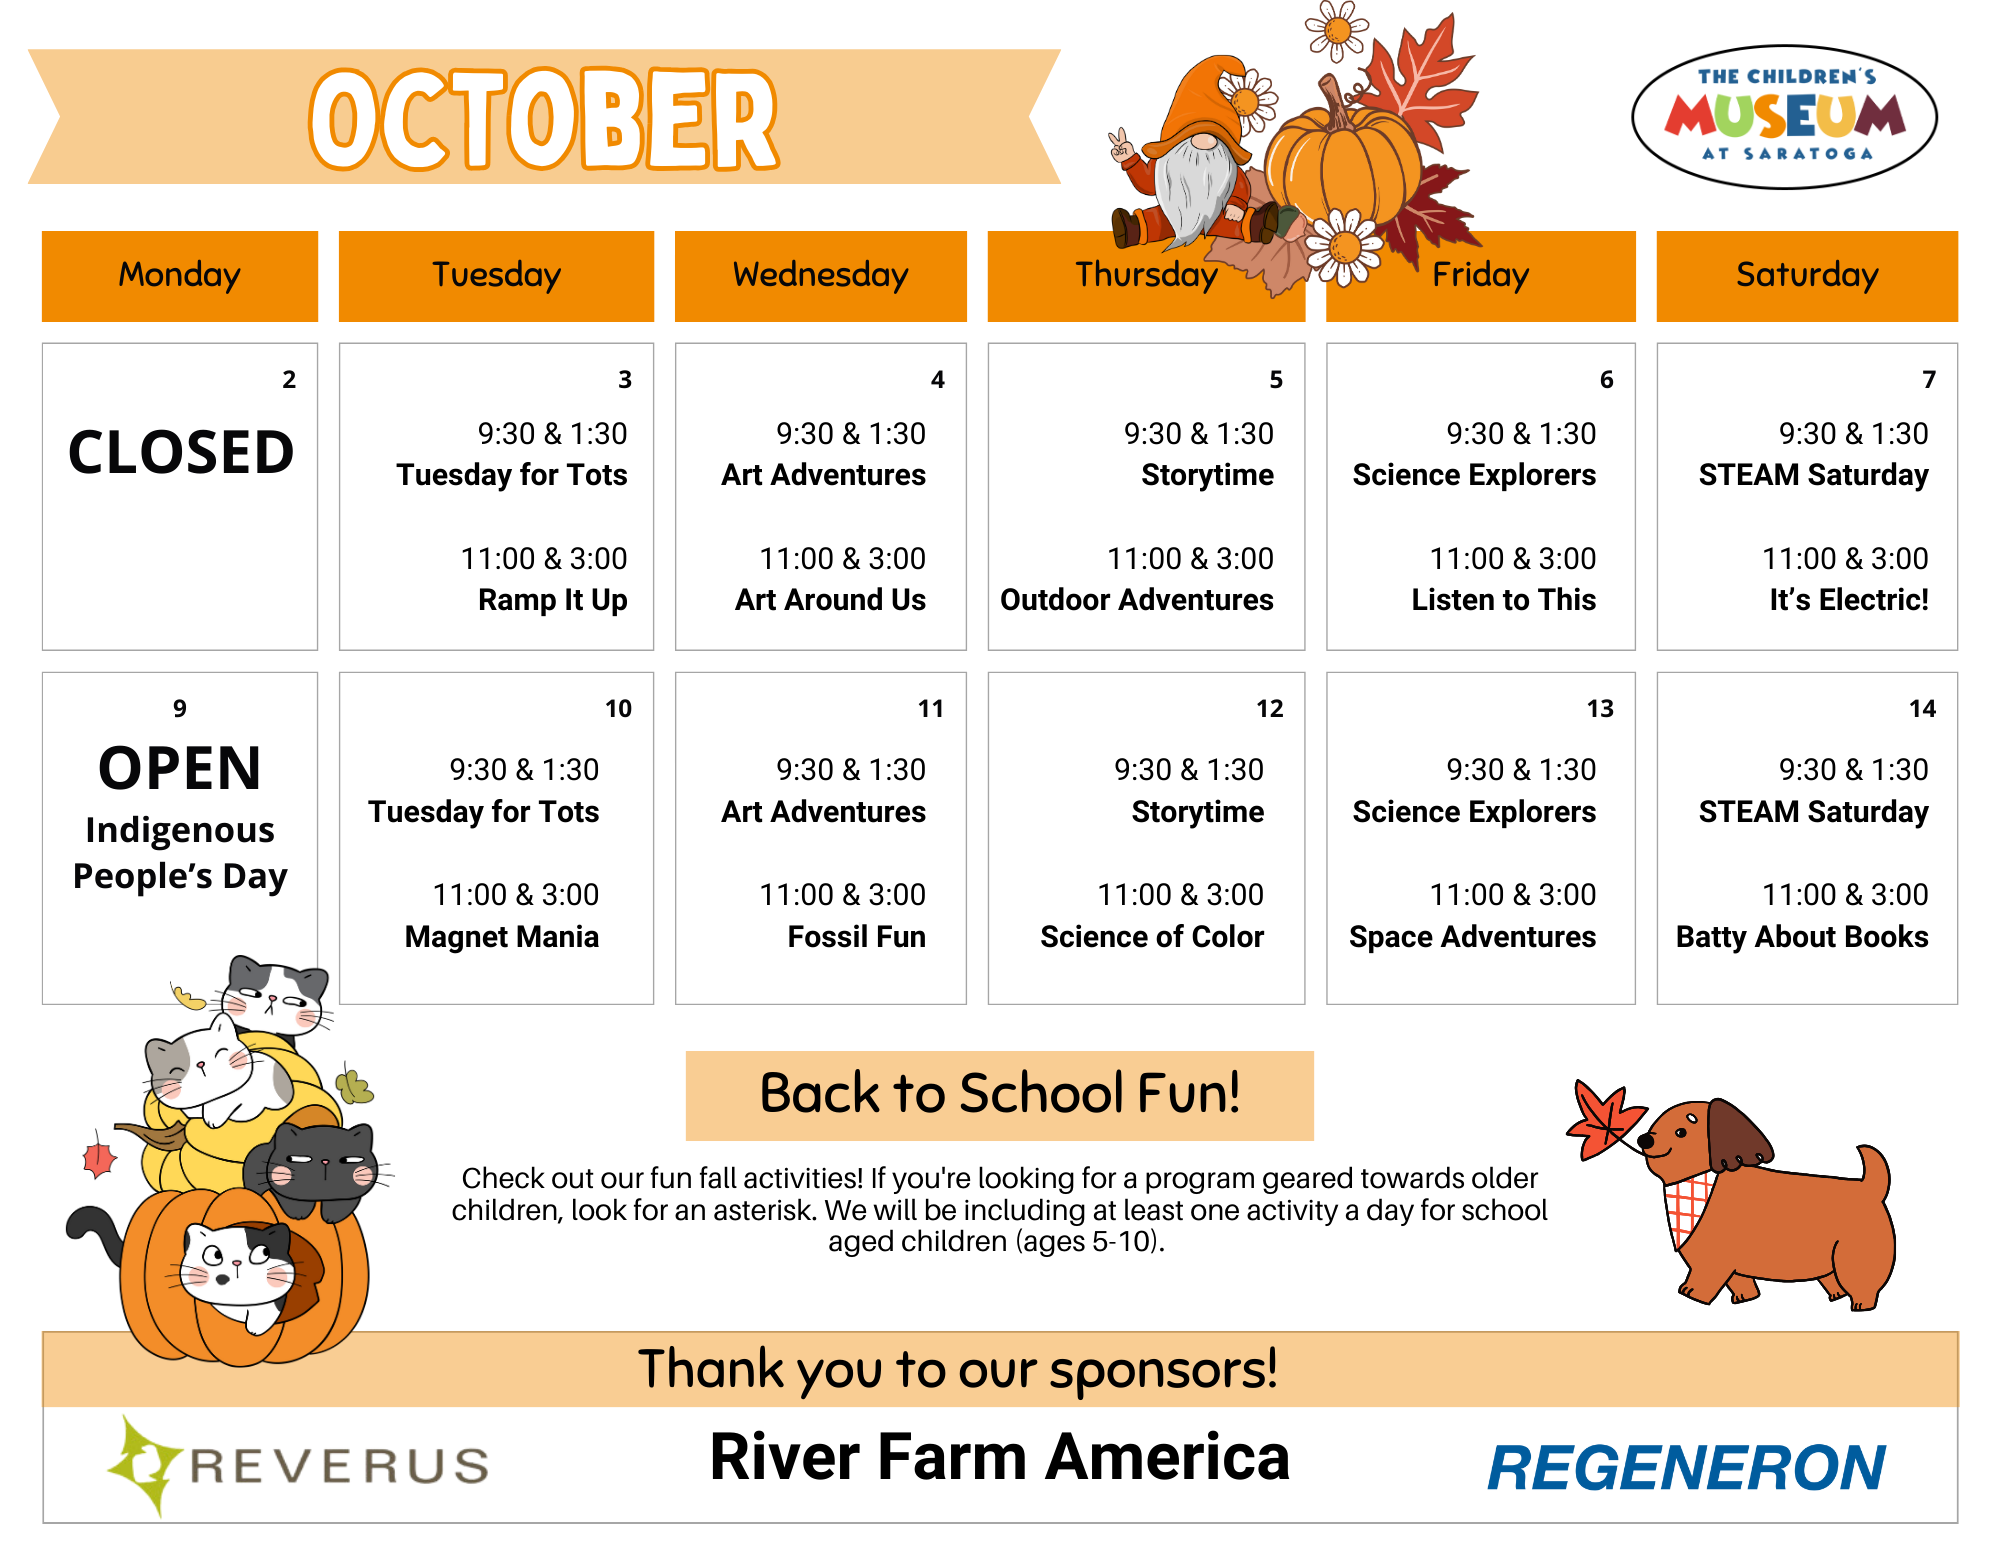 October 2023 calendar of events at the Children's Museum at Saratoga